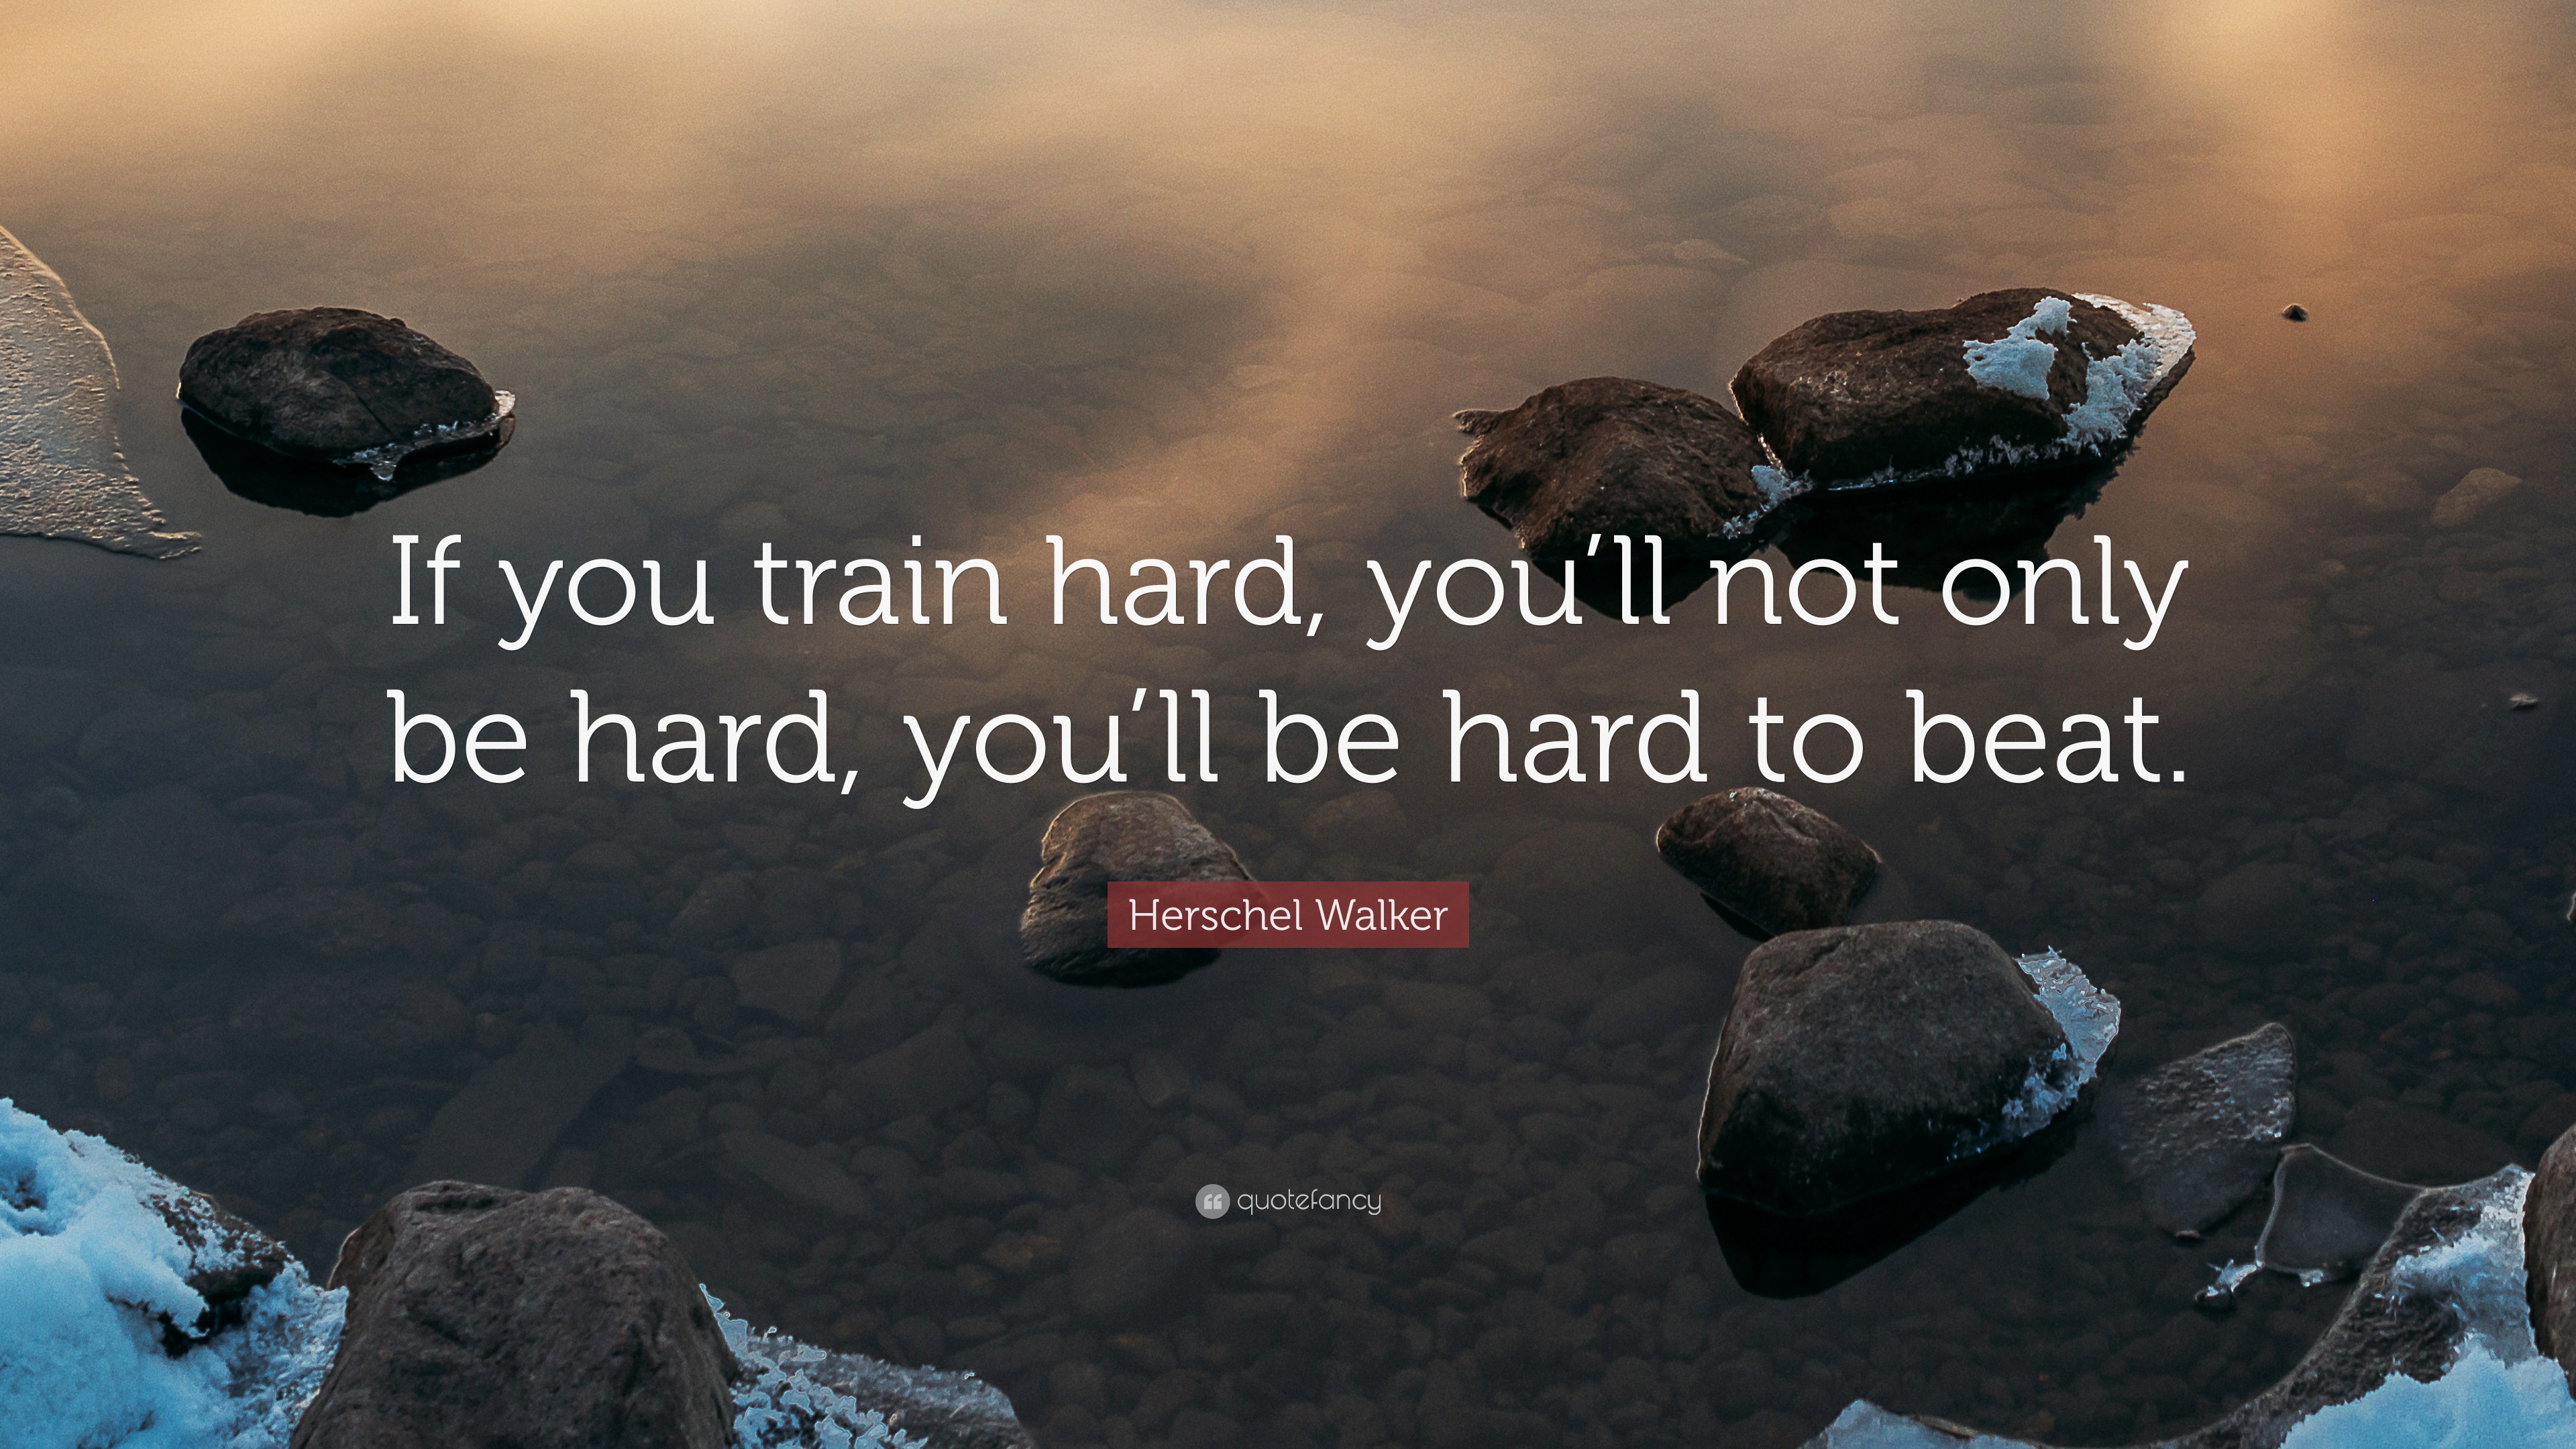 Herschel Walker Quote: “If you train hard, you’ll not only be hard, you ...